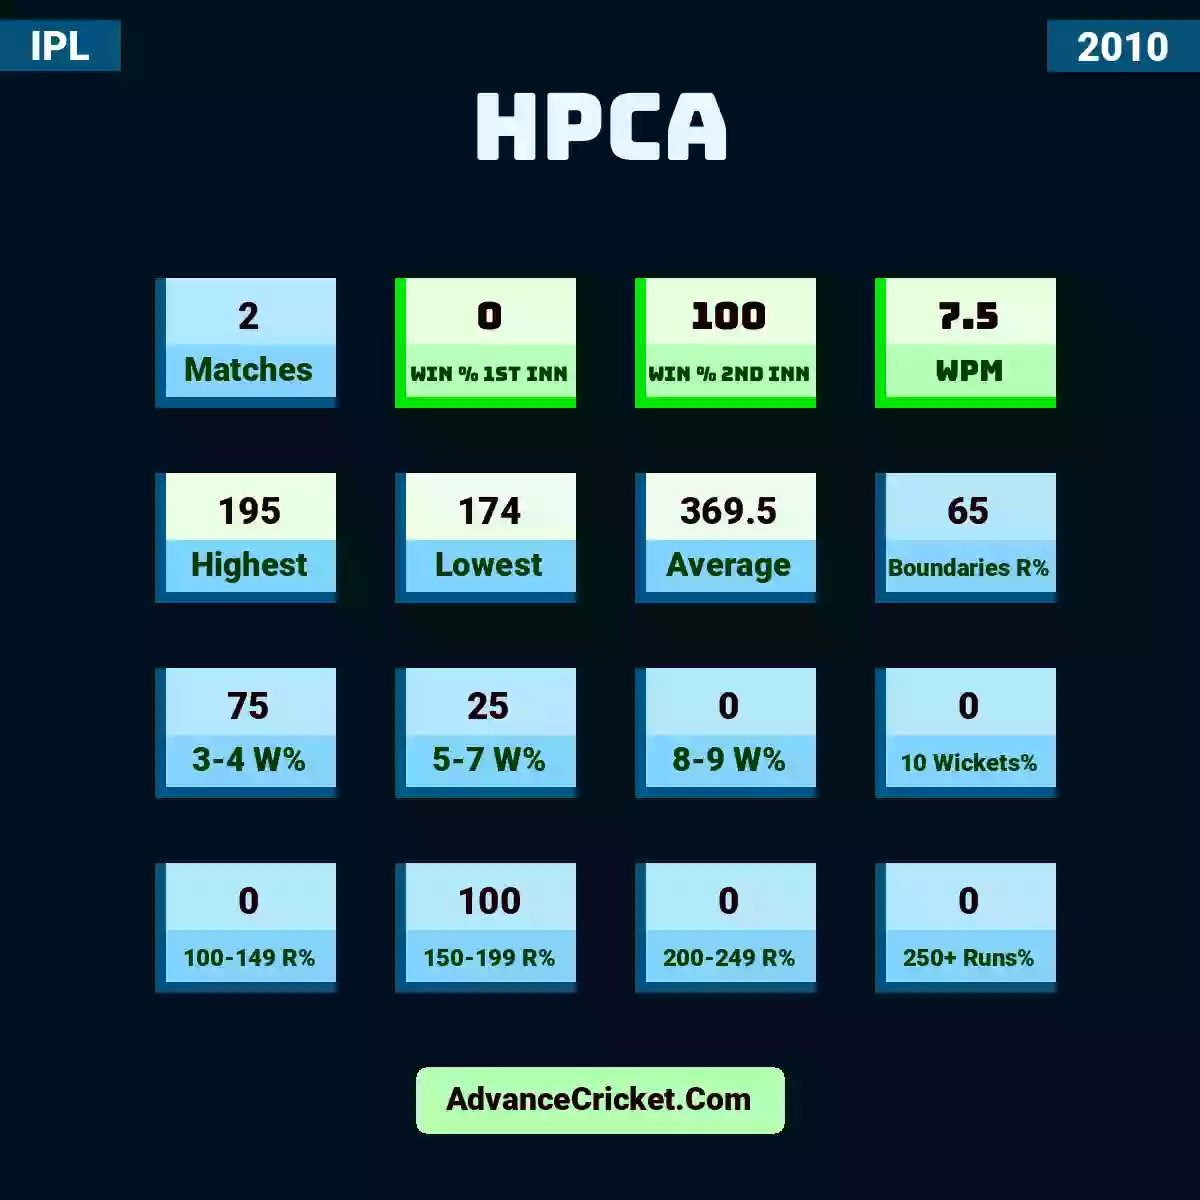 Image showing HPCA with Matches: 2, Win % 1st Inn: 0, Win % 2nd Inn: 100, WPM: 7.5, Highest: 195, Lowest: 174, Average: 369.5, Boundaries R%: 65, 3-4 W%: 75, 5-7 W%: 25, 8-9 W%: 0, 10 Wickets%: 0, 100-149 R%: 0, 150-199 R%: 100, 200-249 R%: 0, 250+ Runs%: 0.